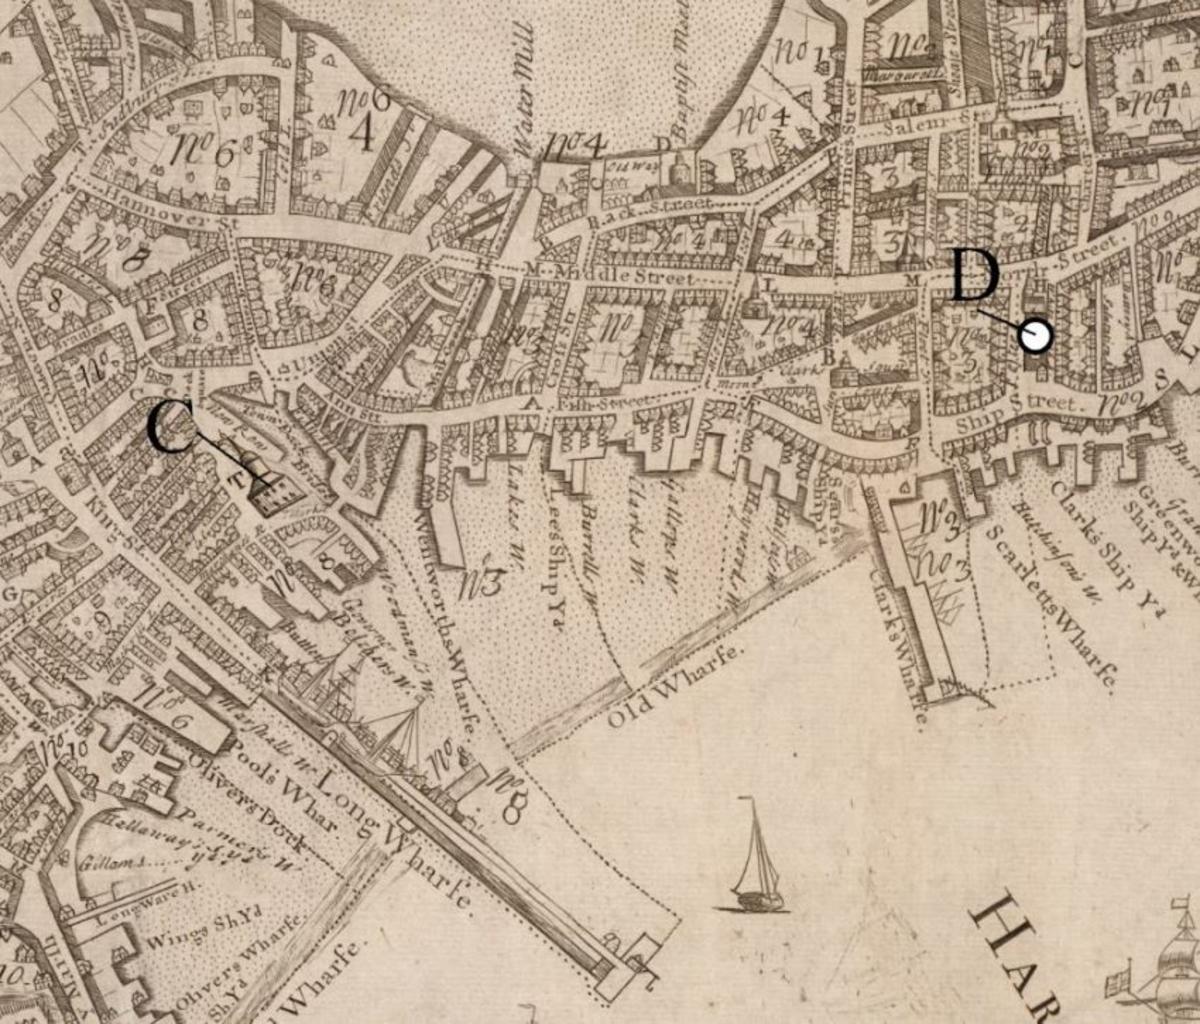 Detail from the 1723 Bonner map showing the locations of Faneuil Hall and the boarding house owned by Chloe and Caesar Spear.